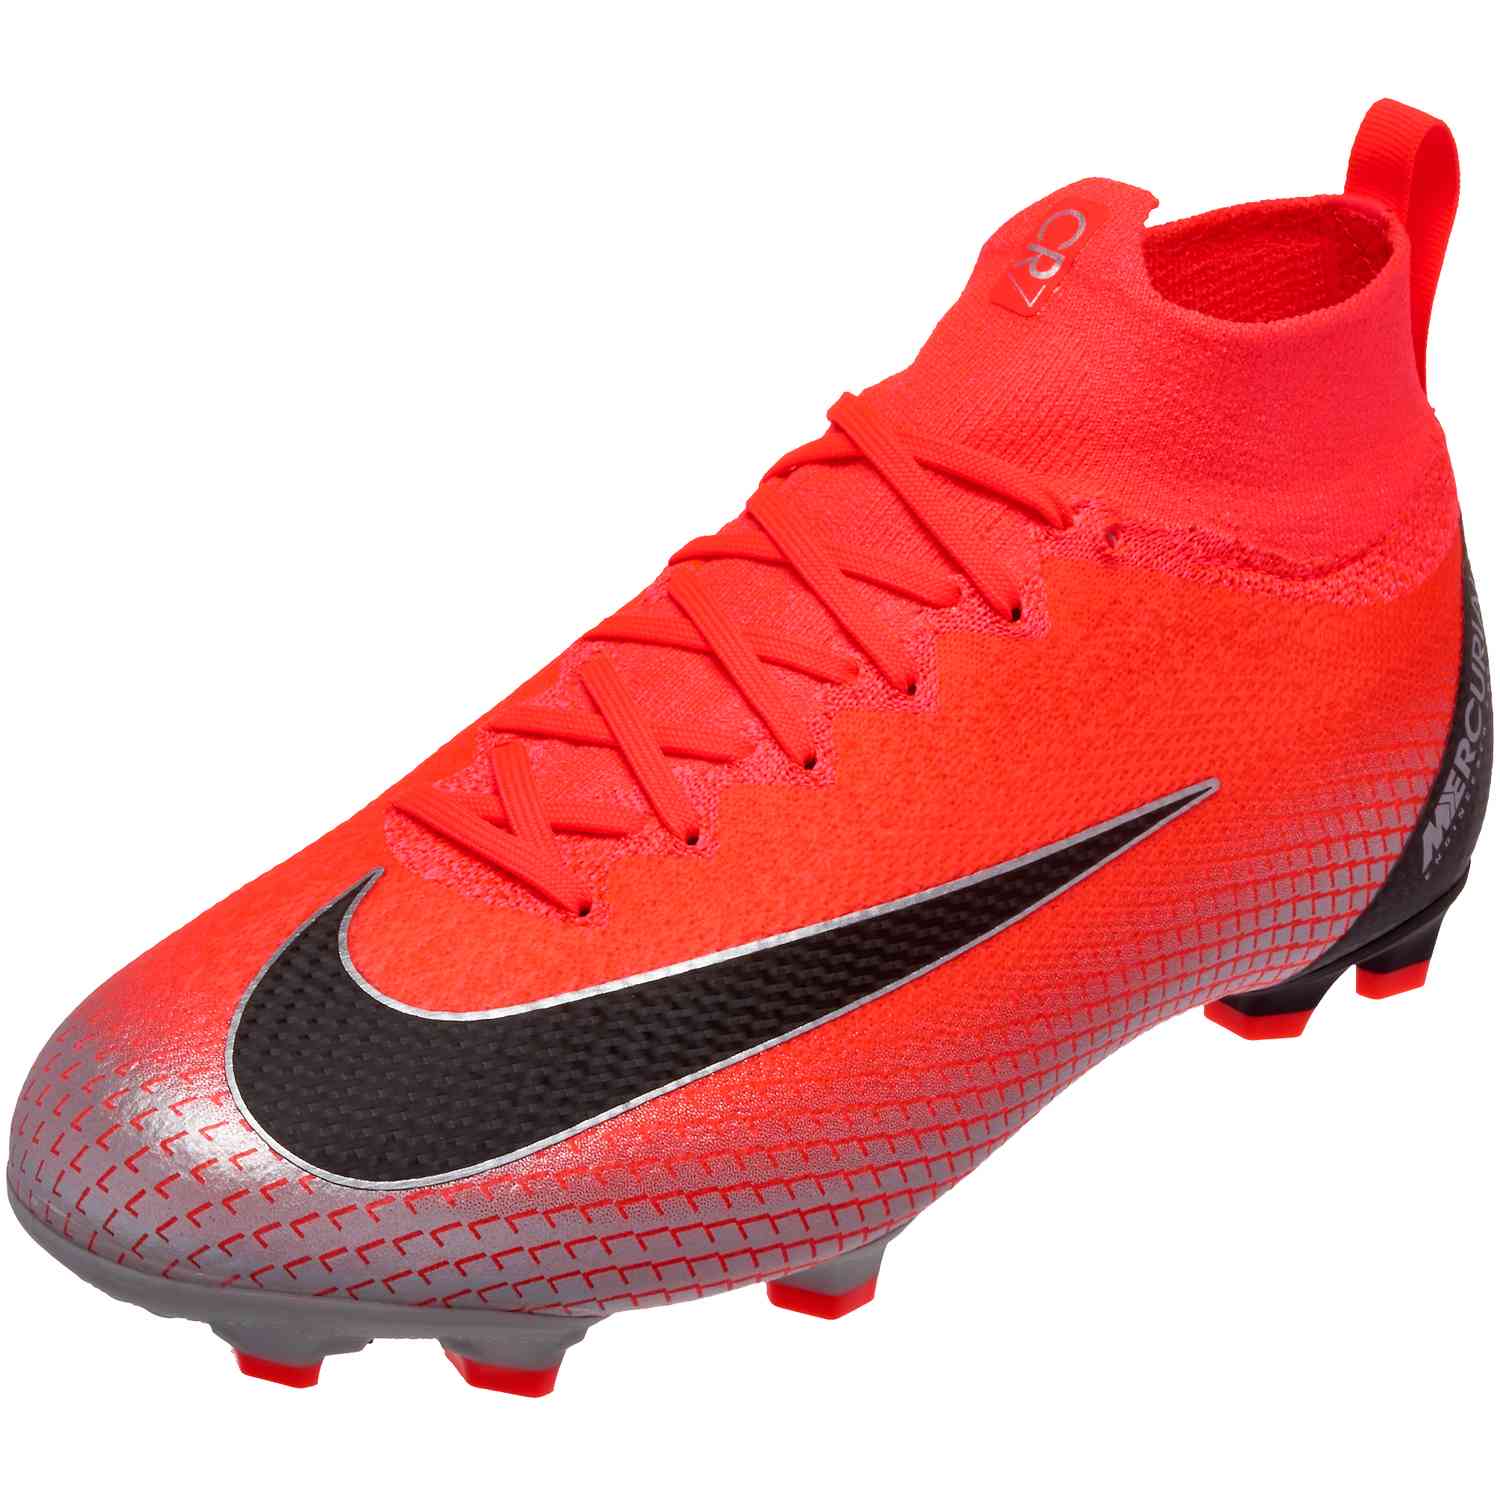 Nike JR Superfly 6 CR7 Club Turf Youth Soccer Shoes 1Y Red